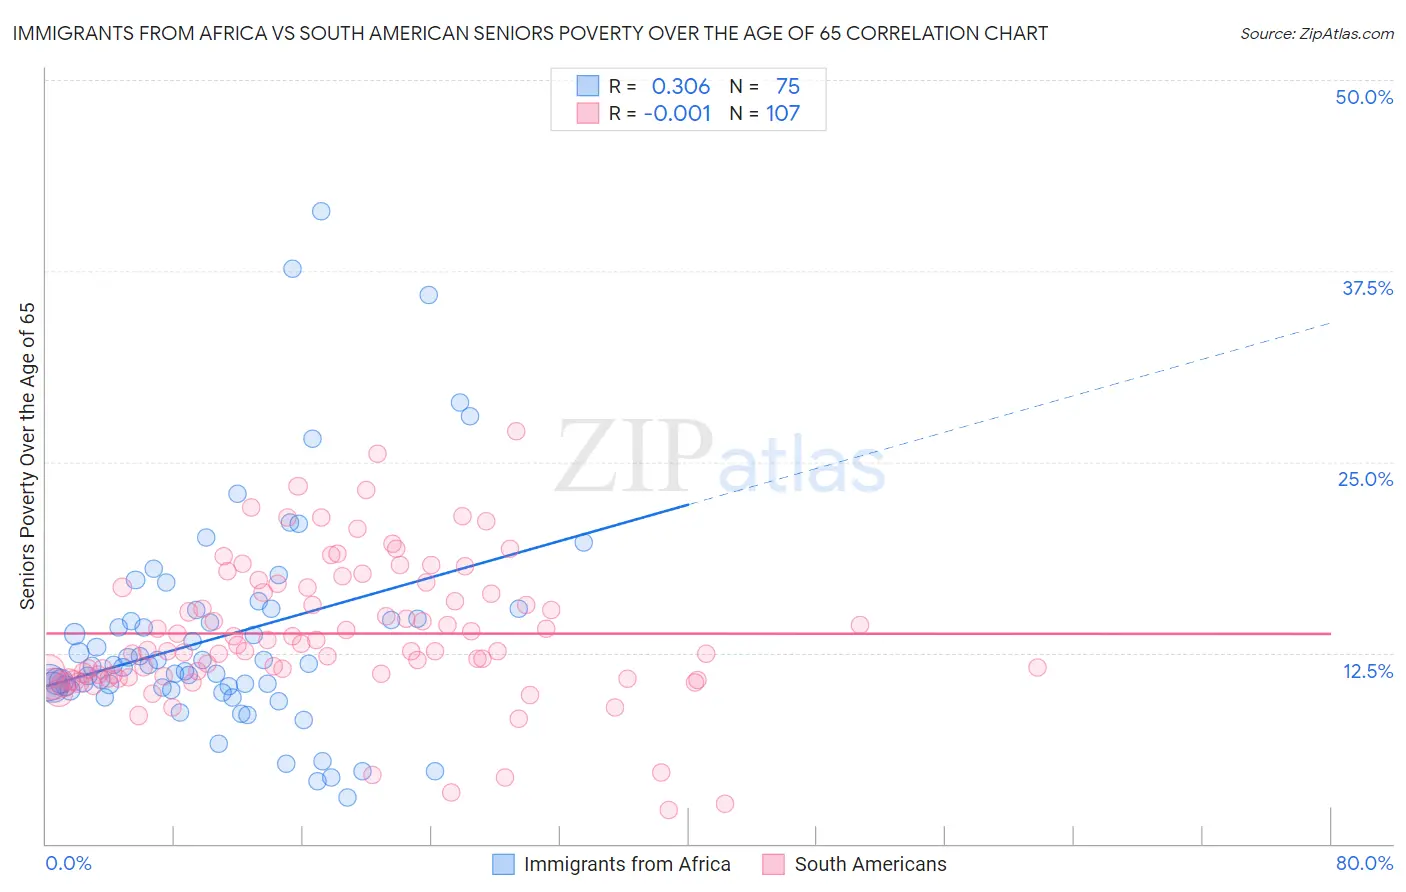 Immigrants from Africa vs South American Seniors Poverty Over the Age of 65